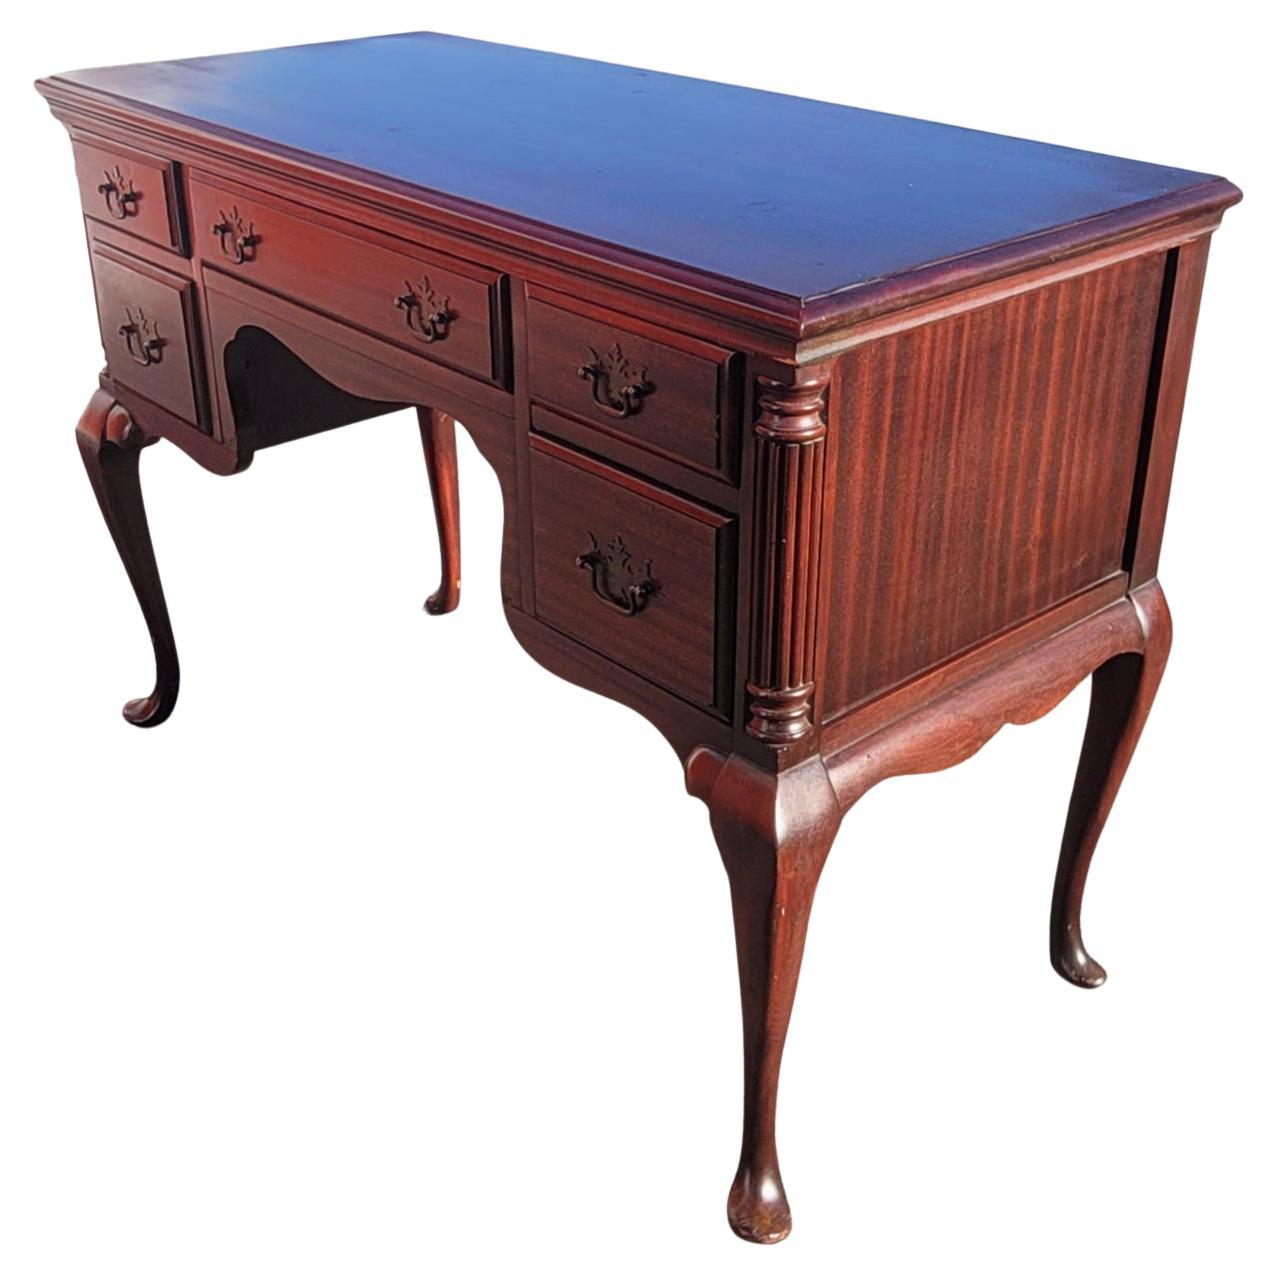 A beautiful and patinated Early 1900's Chippendale genuine mahogany desk / vanity with mirror in good condition. Beautiful mahogany grain. Dovetail drawers construction with patinated original drawer pulls. Perfectly functioning drawers. Desk Vanity